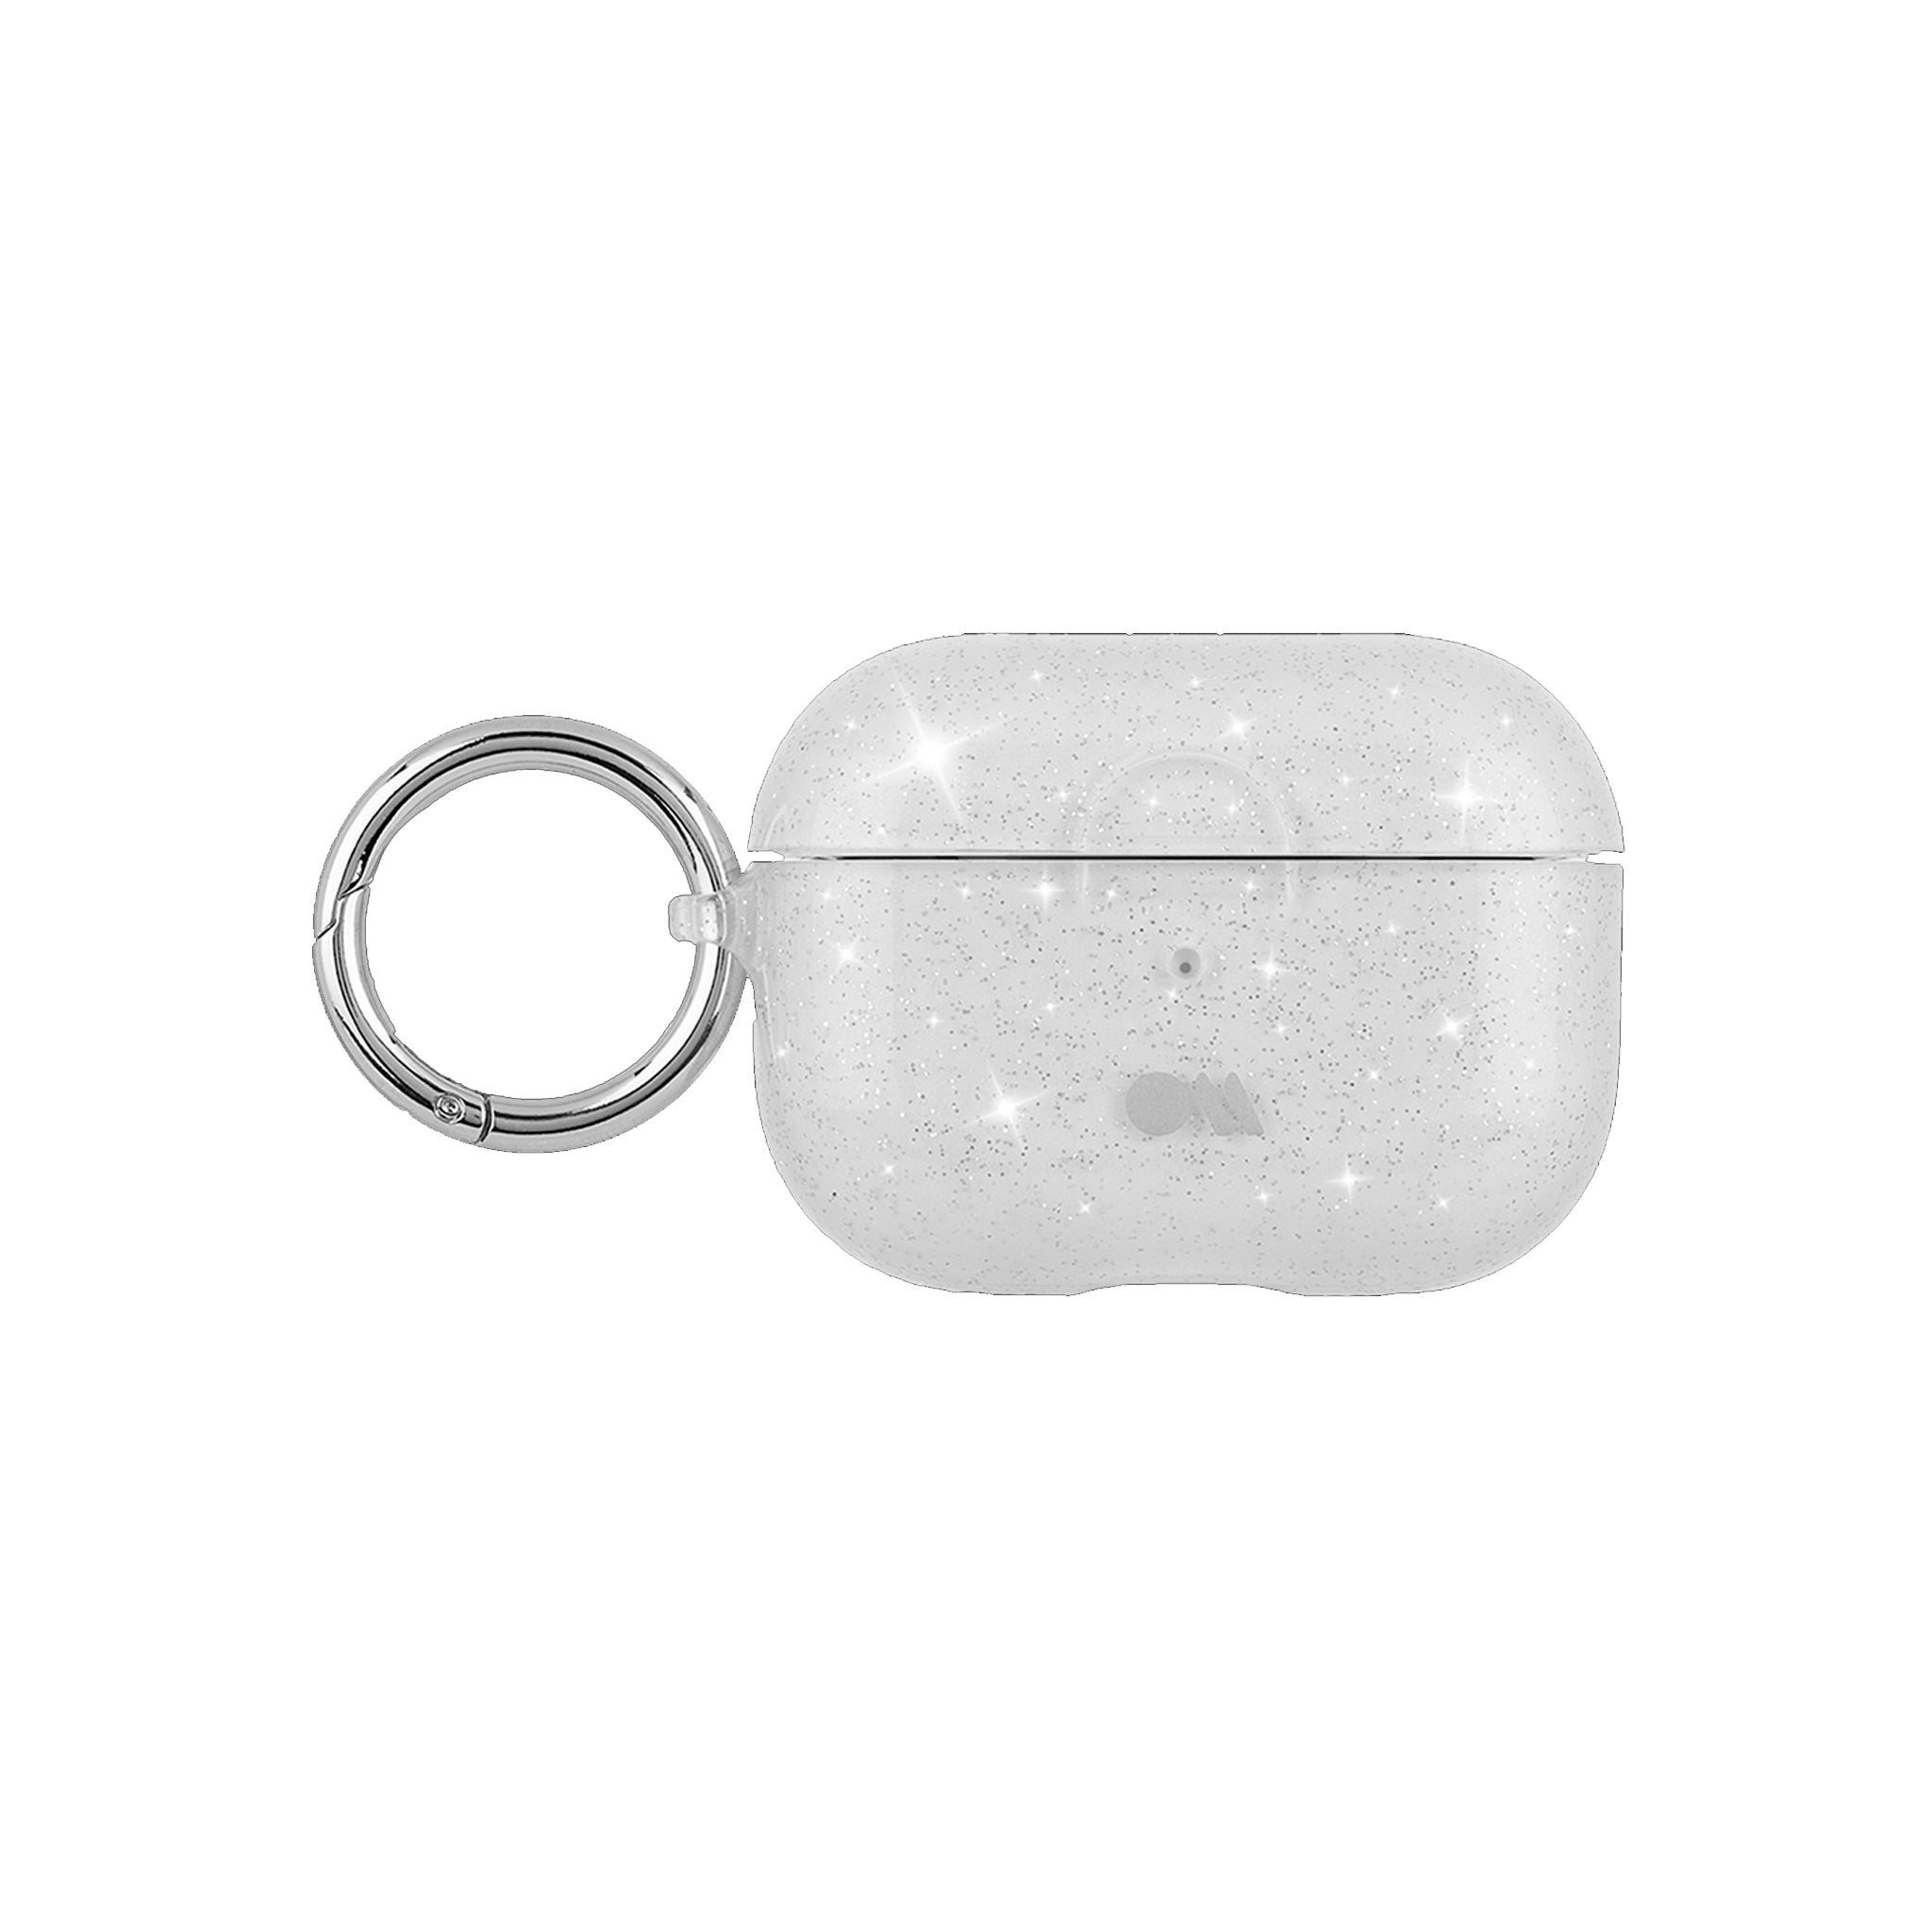 Case-mate - Sheer Crystal Case For Apple Airpods Pro - Clear